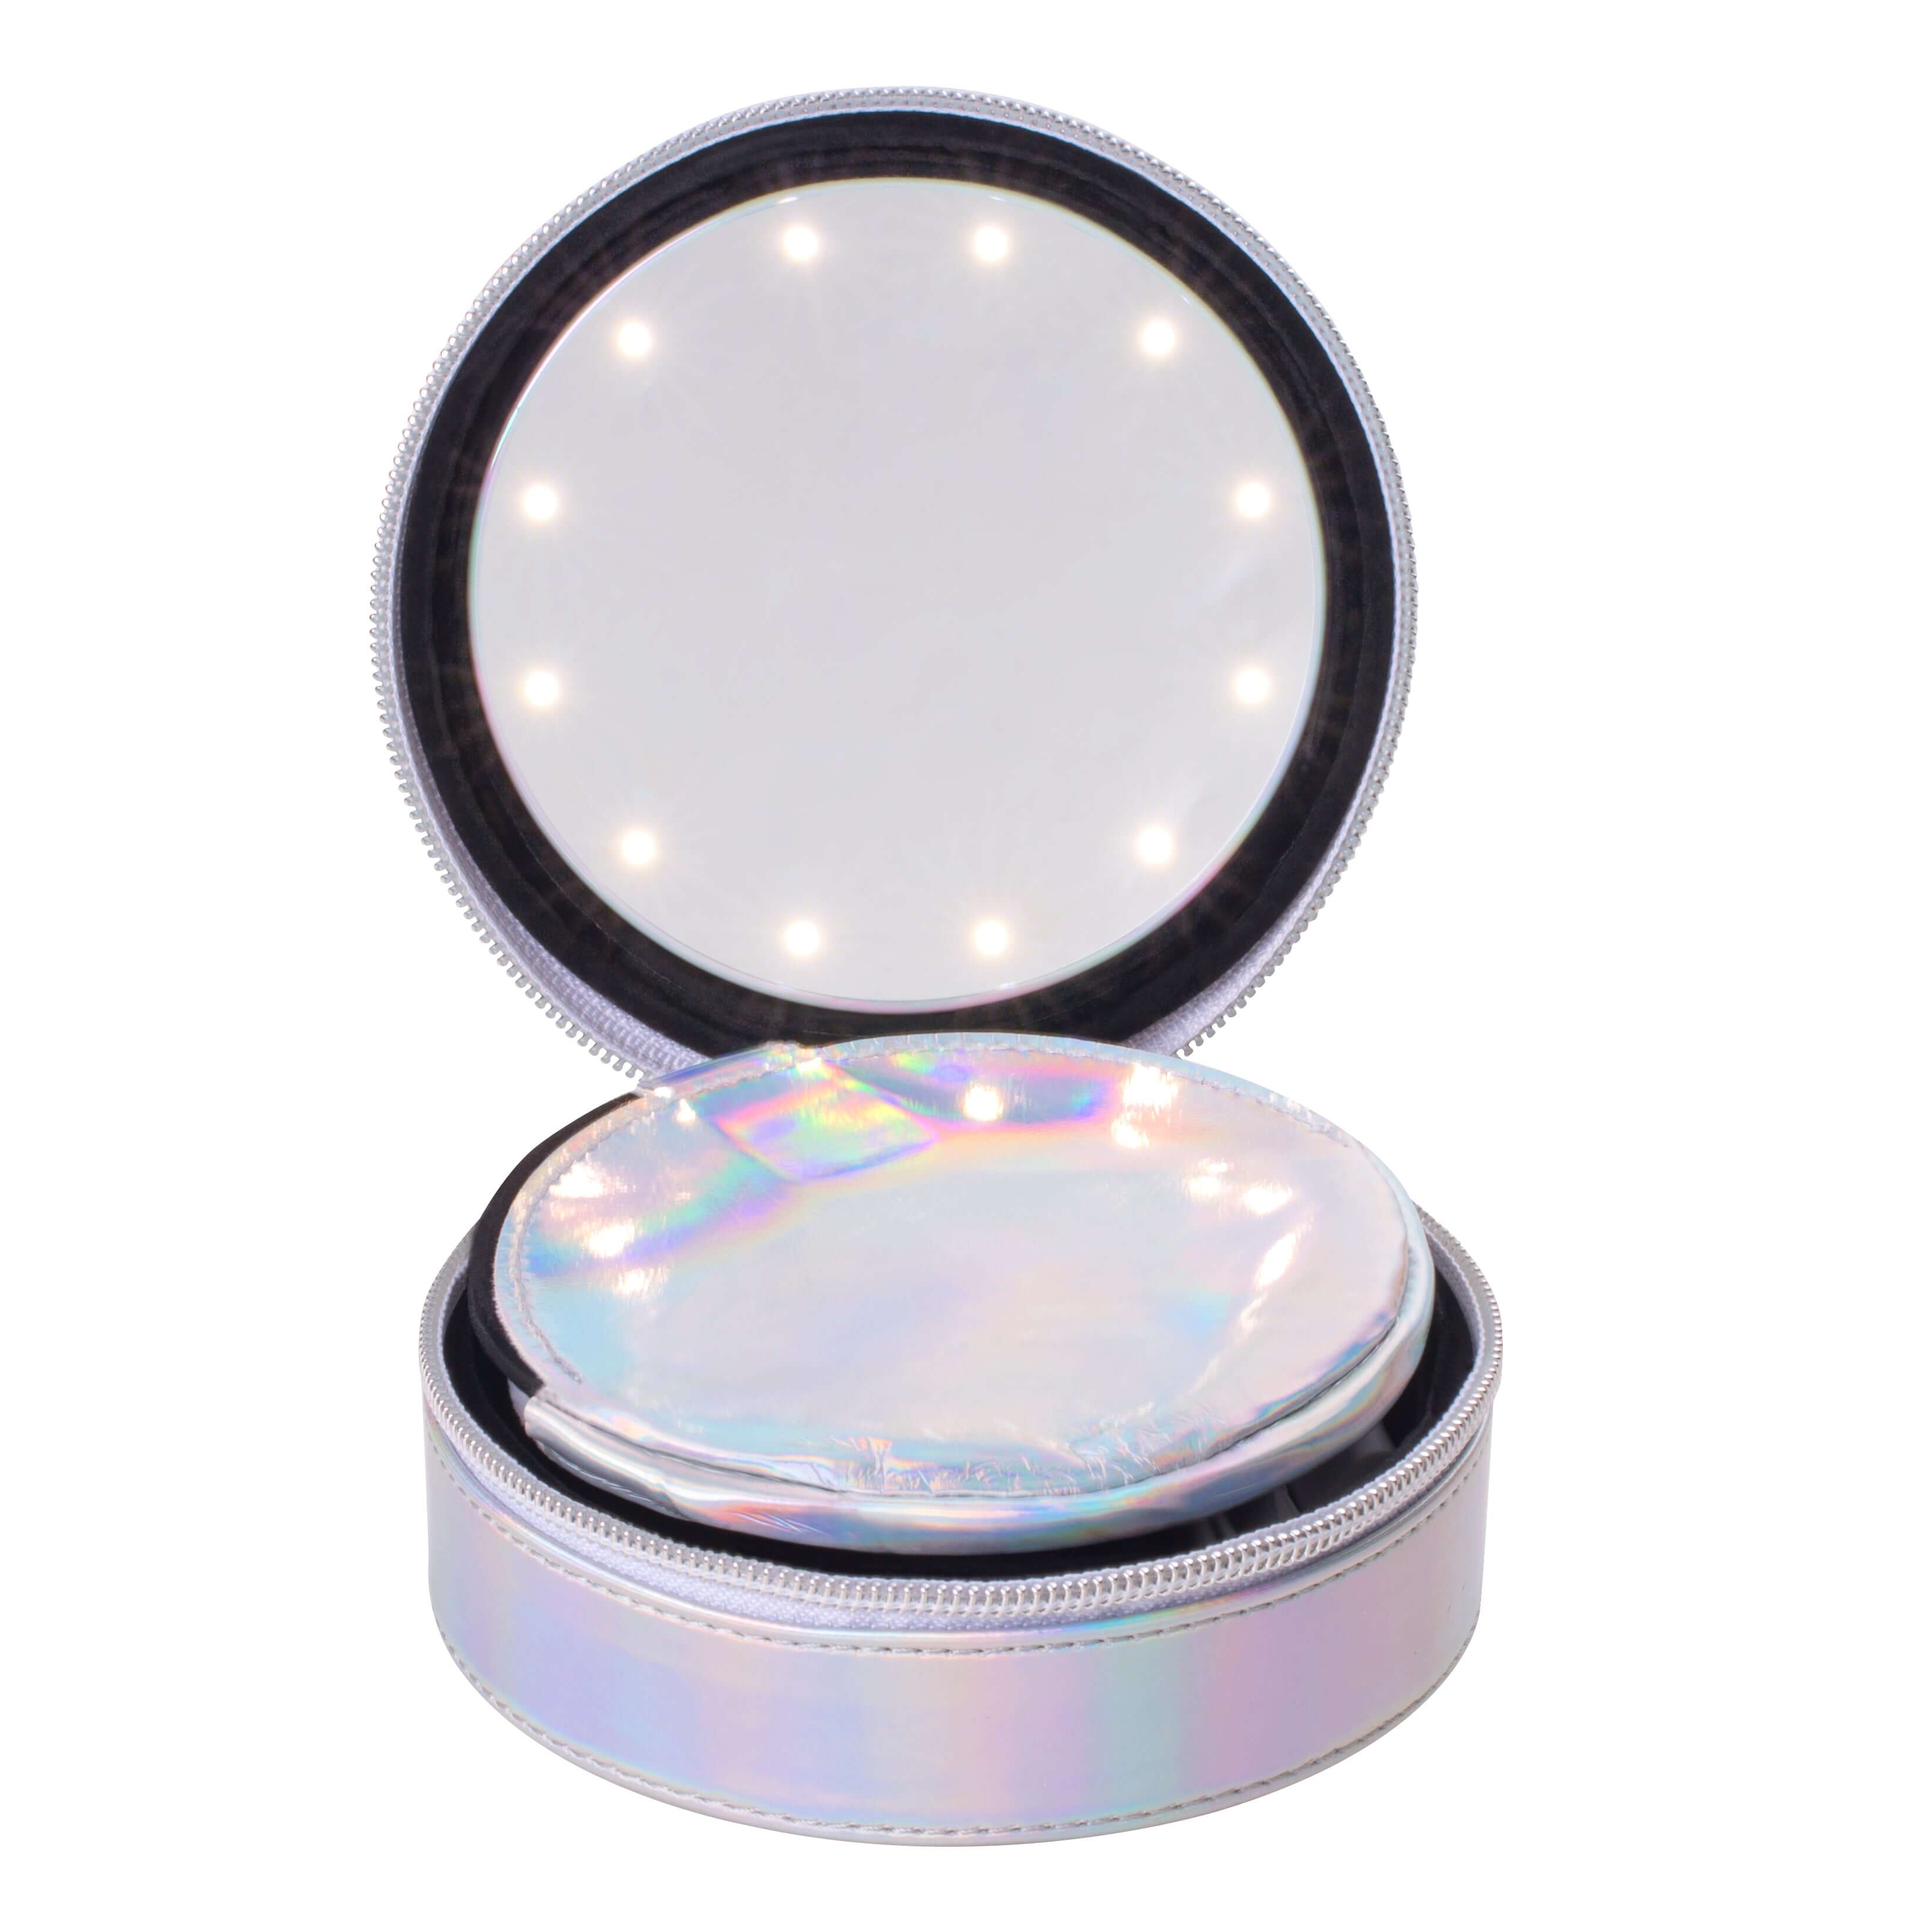 Glow with confidence using the RIKI SUPER FINE LED Purse Mirror in Iridescent